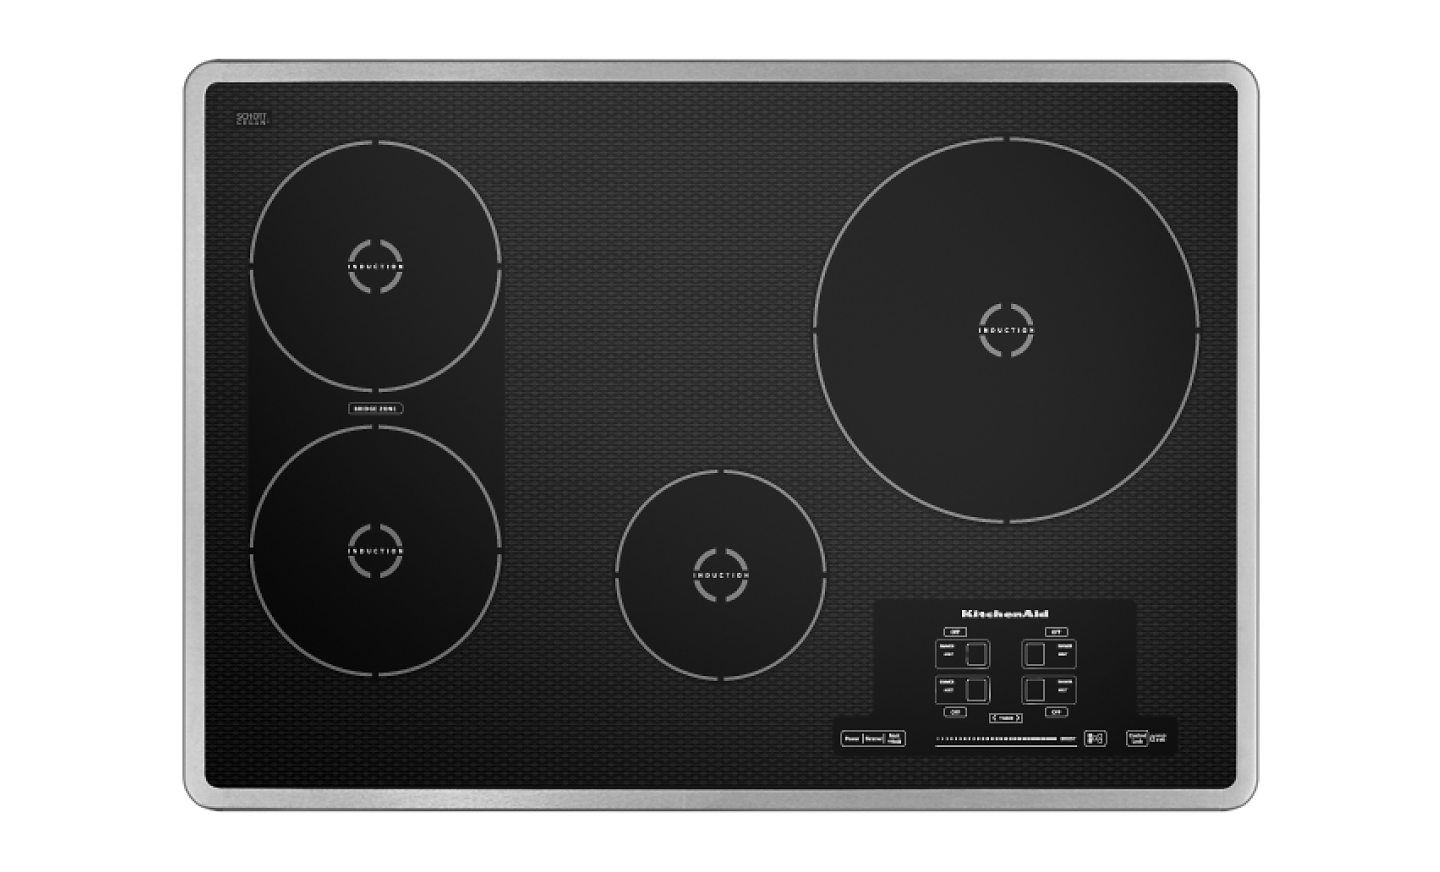 A KitchenAid® black induction cooktop with stainless steel trim.